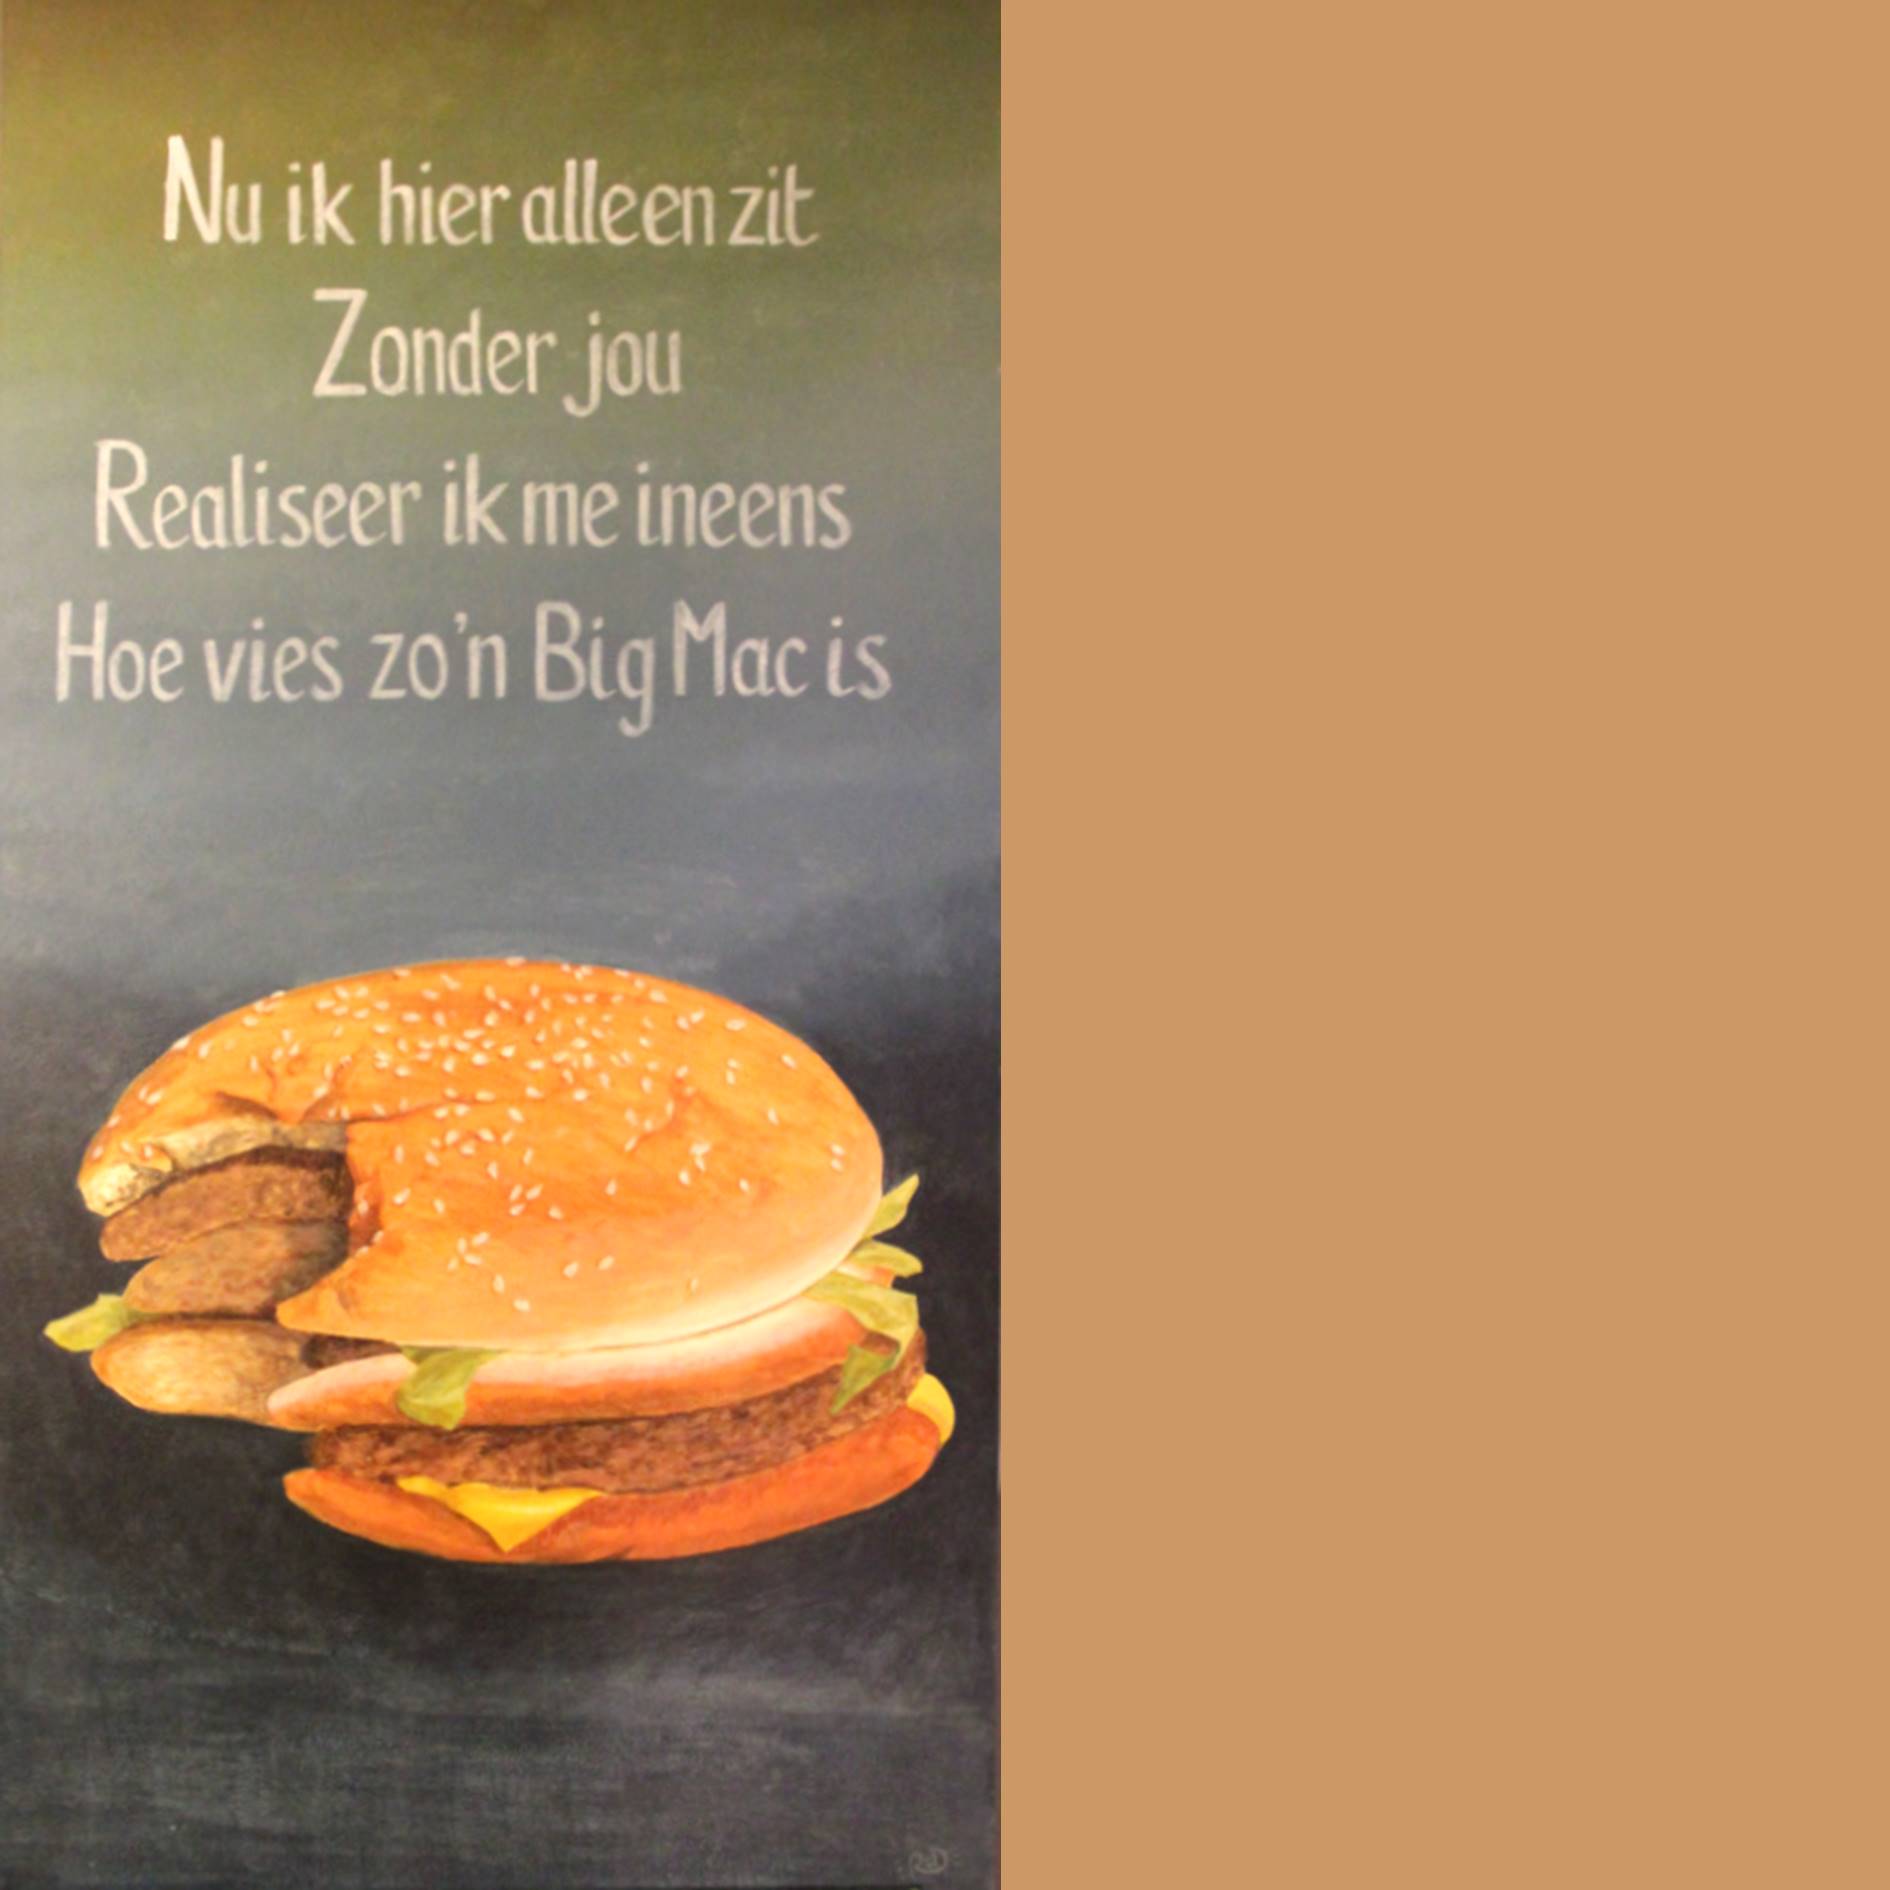 Painting of a Big Mac with the poem above it.